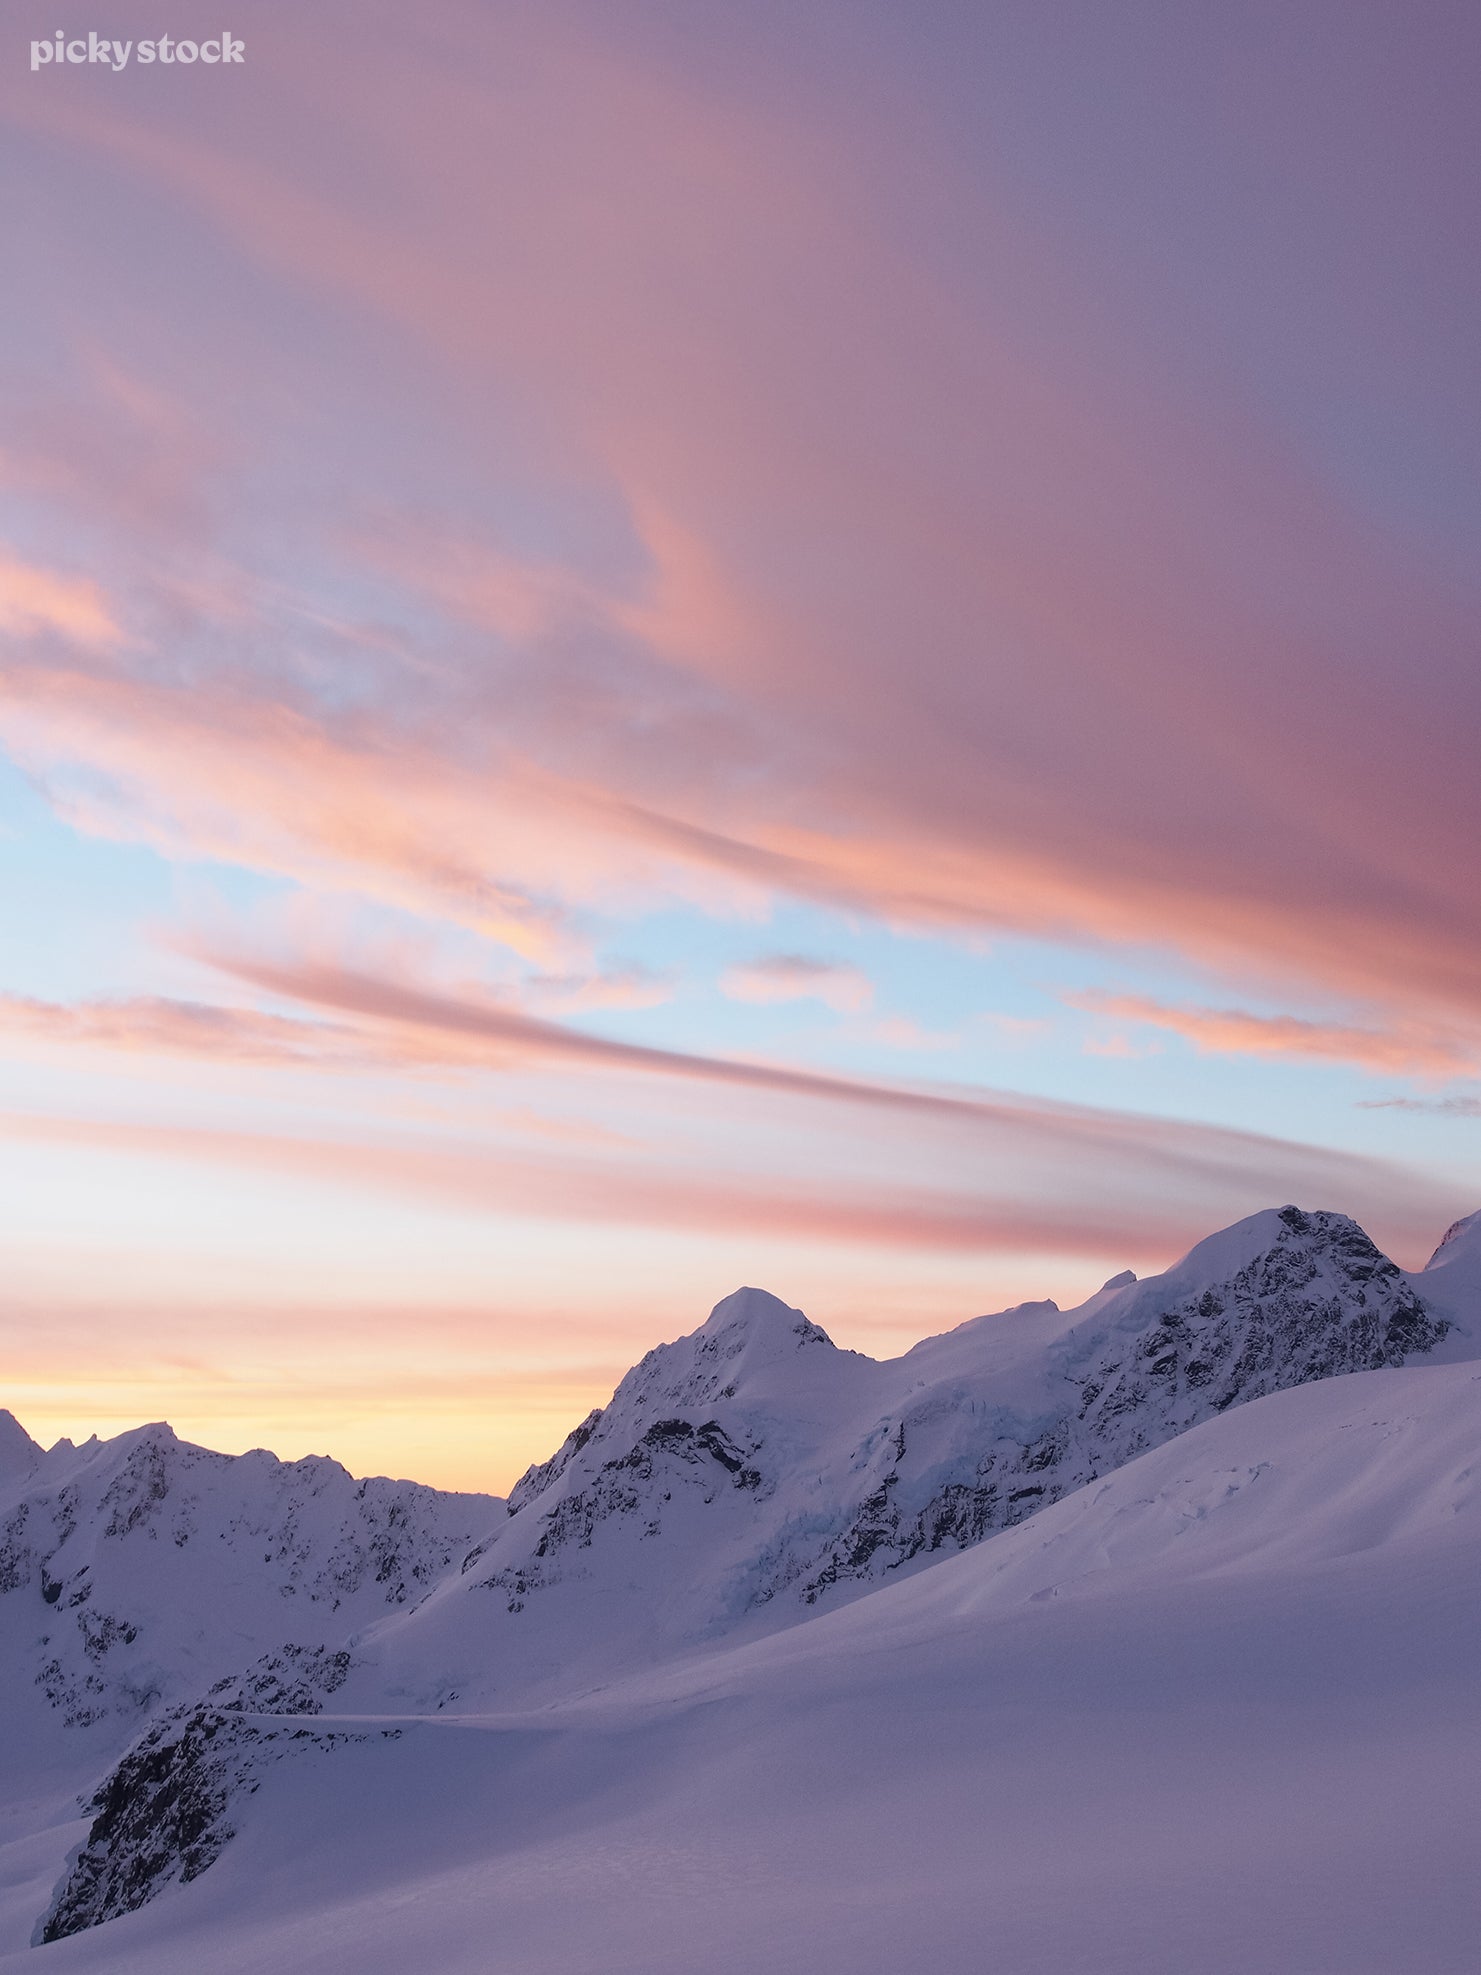 Portrait of snowy mountain top reflecting the vibrant hues of the afternoon sky. The snow casts shadows of bright hues of pink and blue that cascade across the sky.